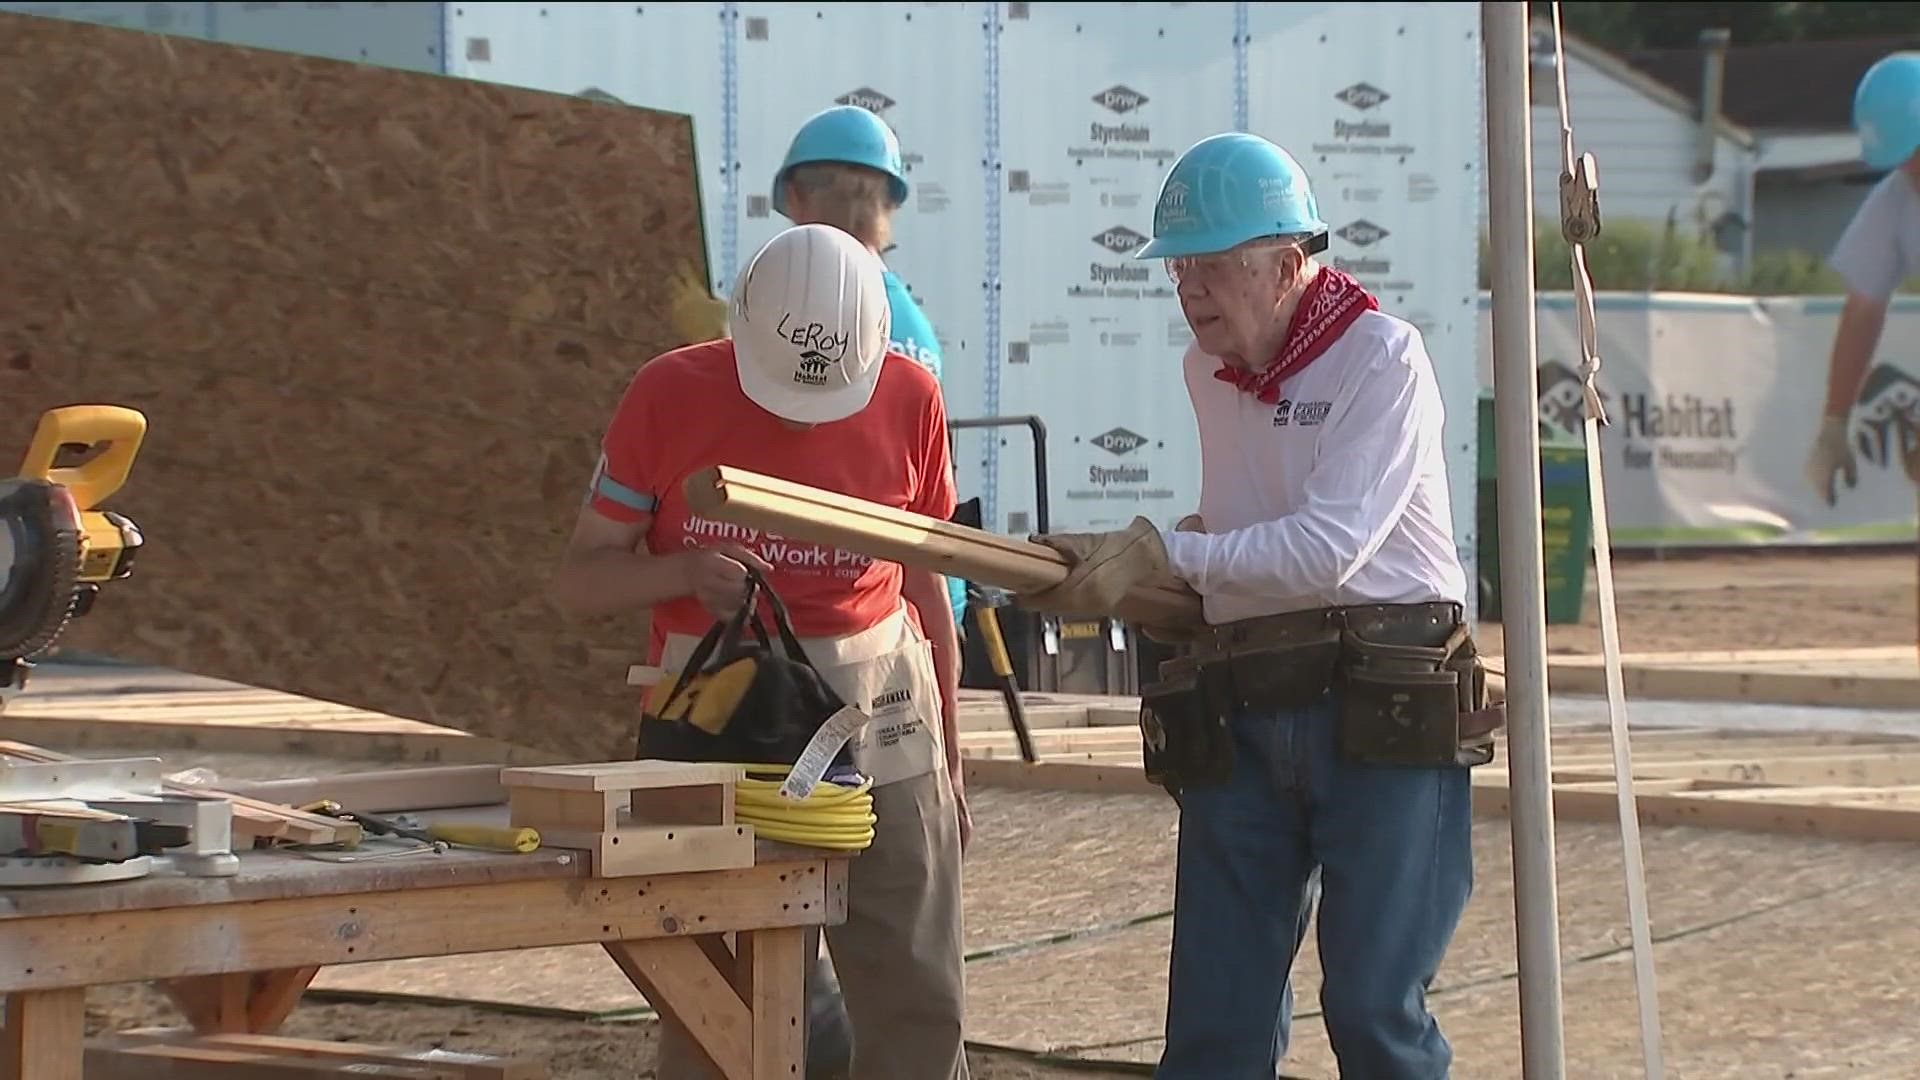 Former president Jimmy Carter worked for decades to ensure people had cost-friendly homes through Habitat for Humanity.